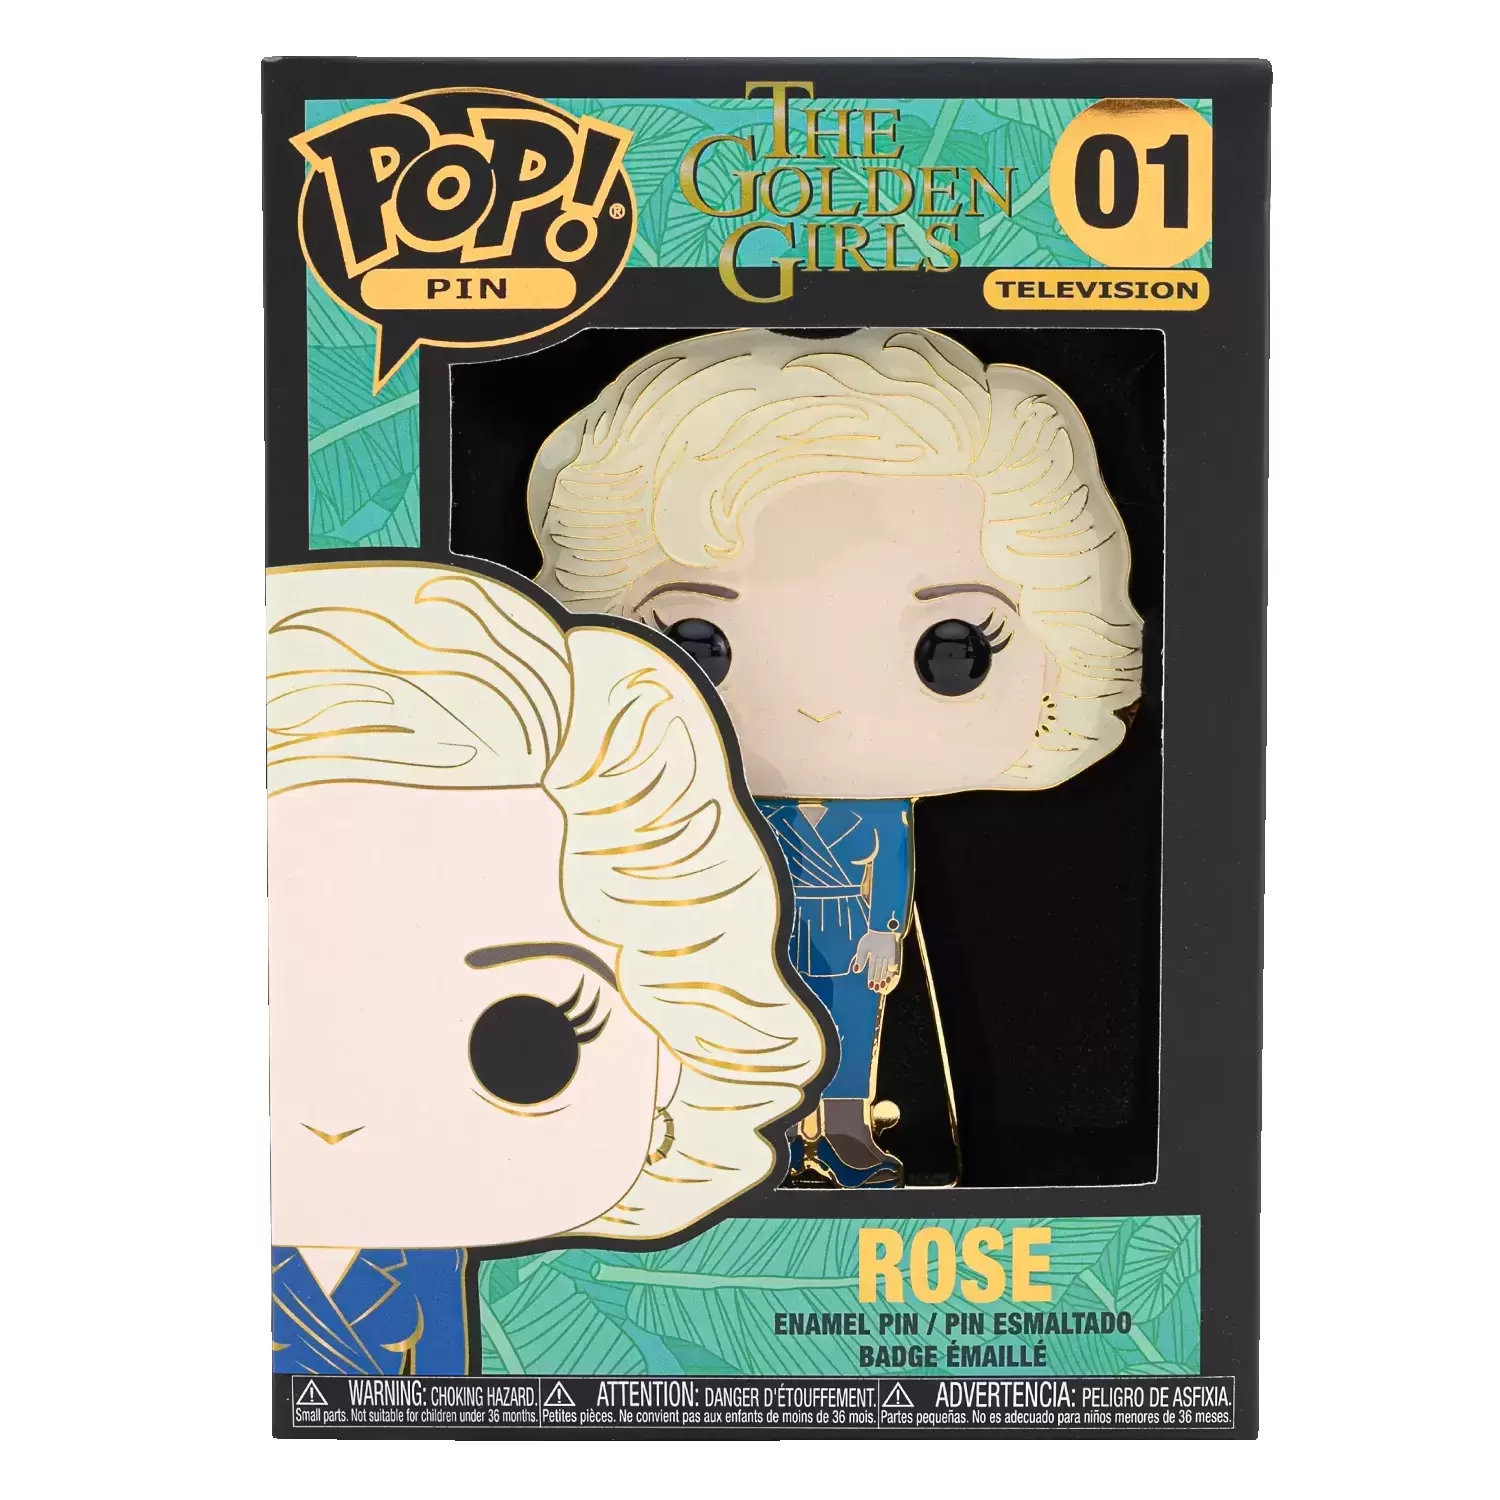 POP! Pin Television - The Golden Girls - Rose Nylund